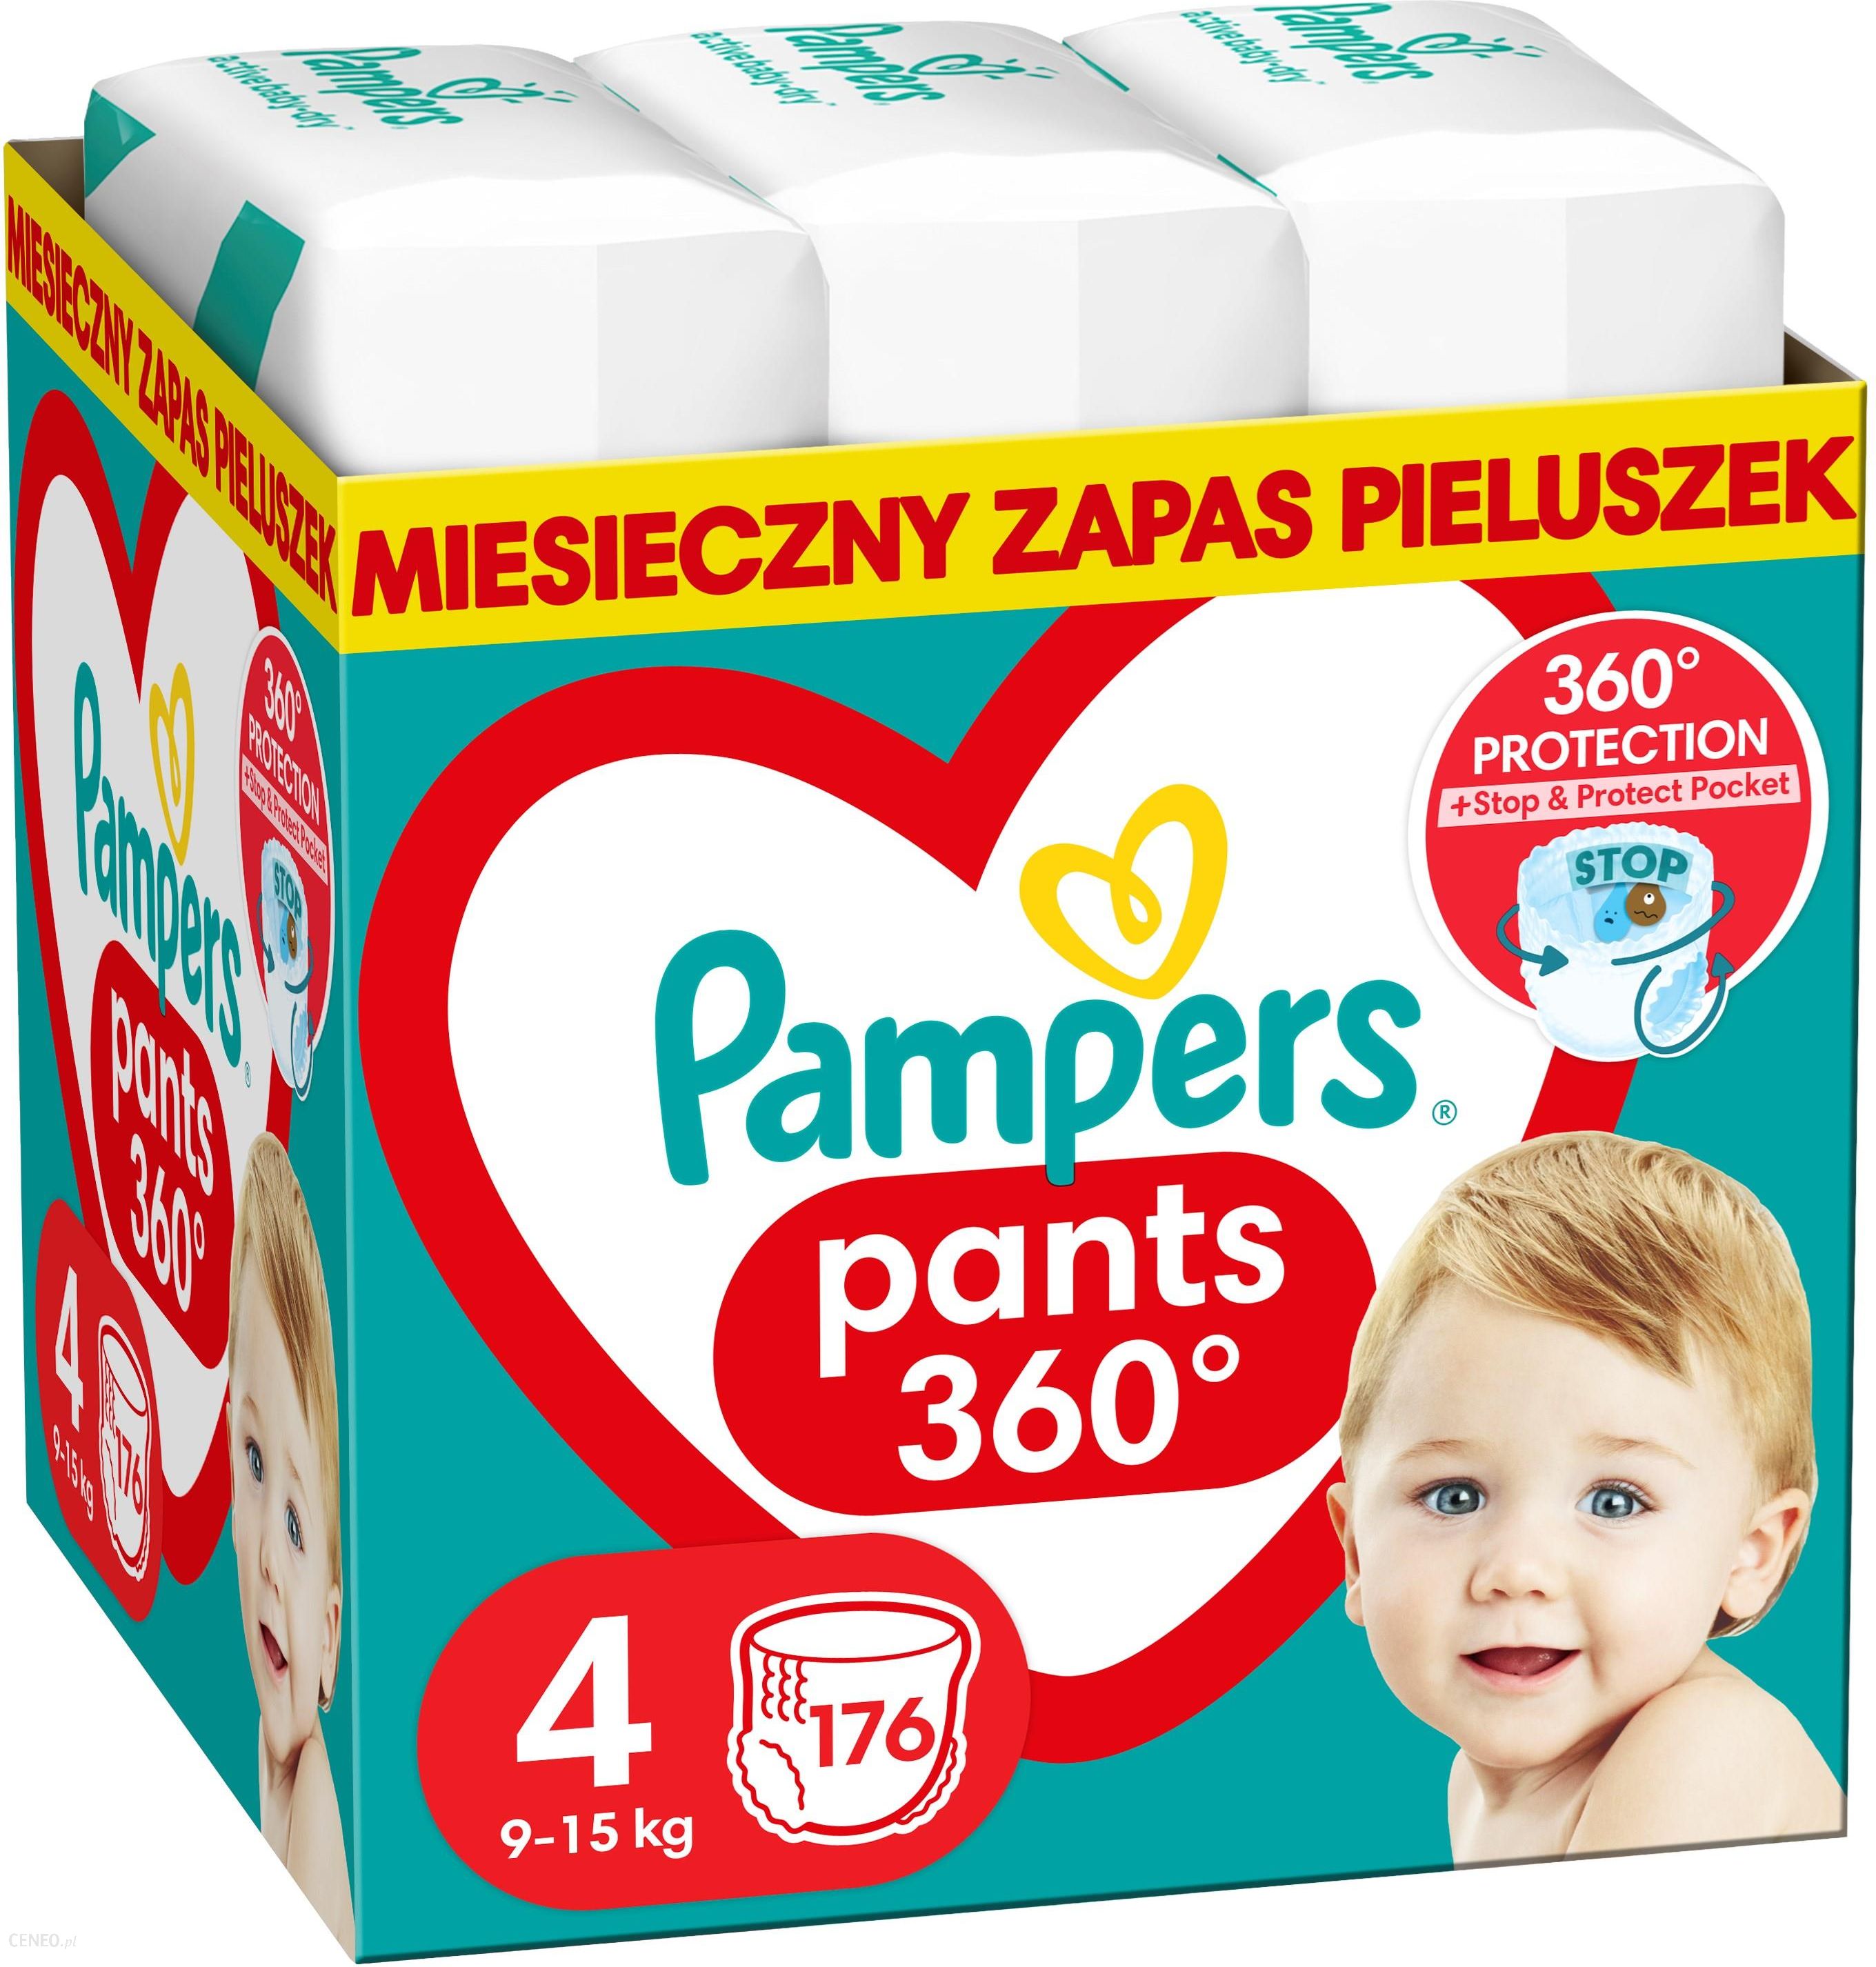 o pampers